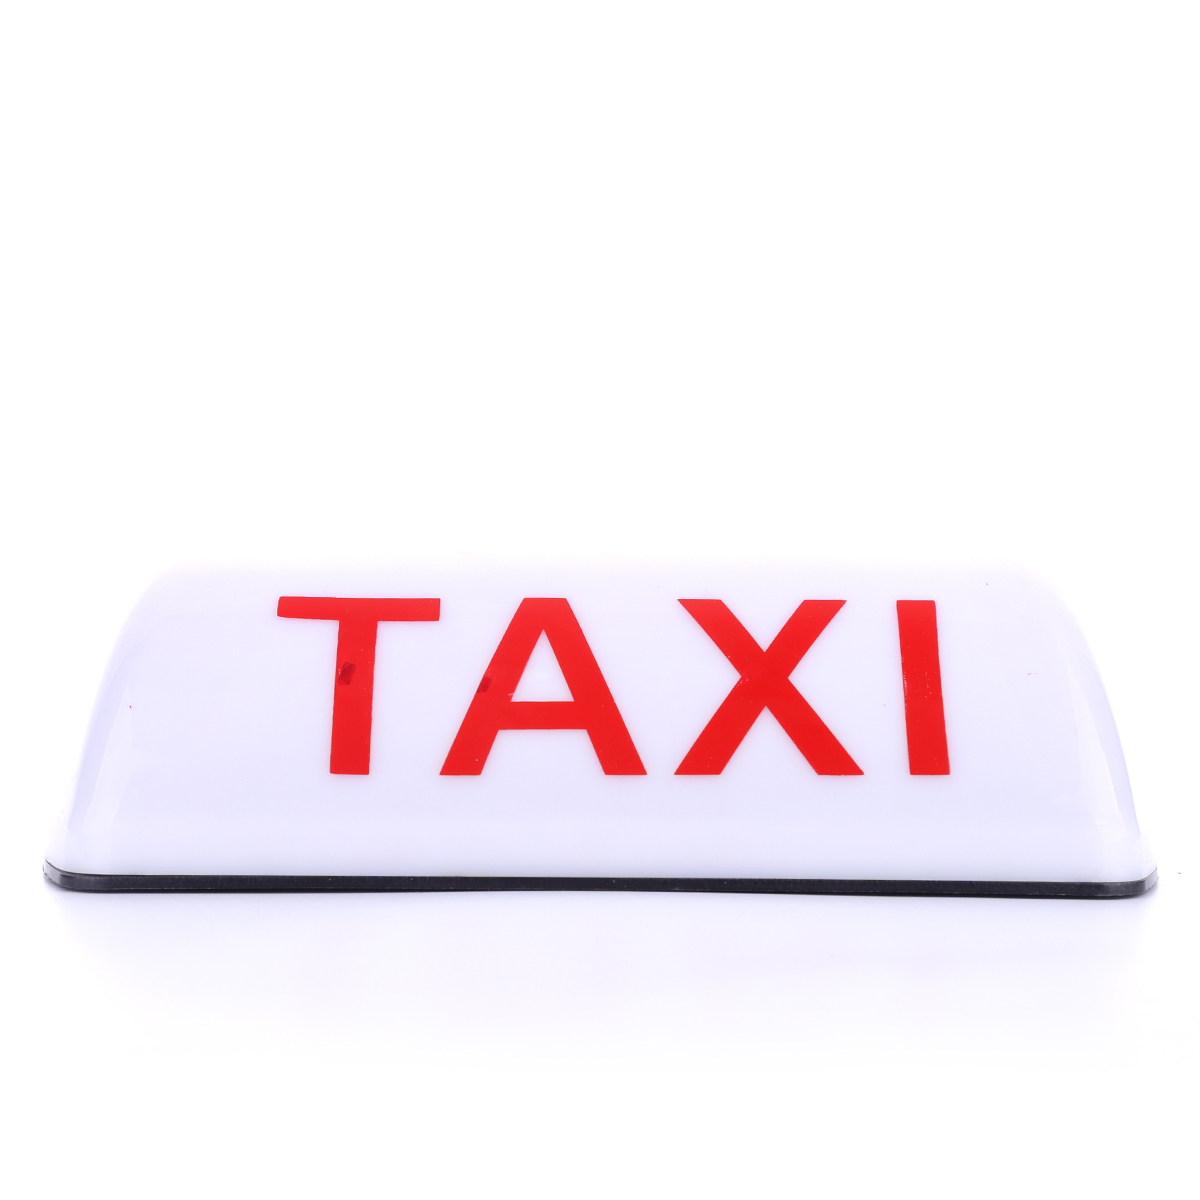 Led Lamp Taxi Roof Top Light